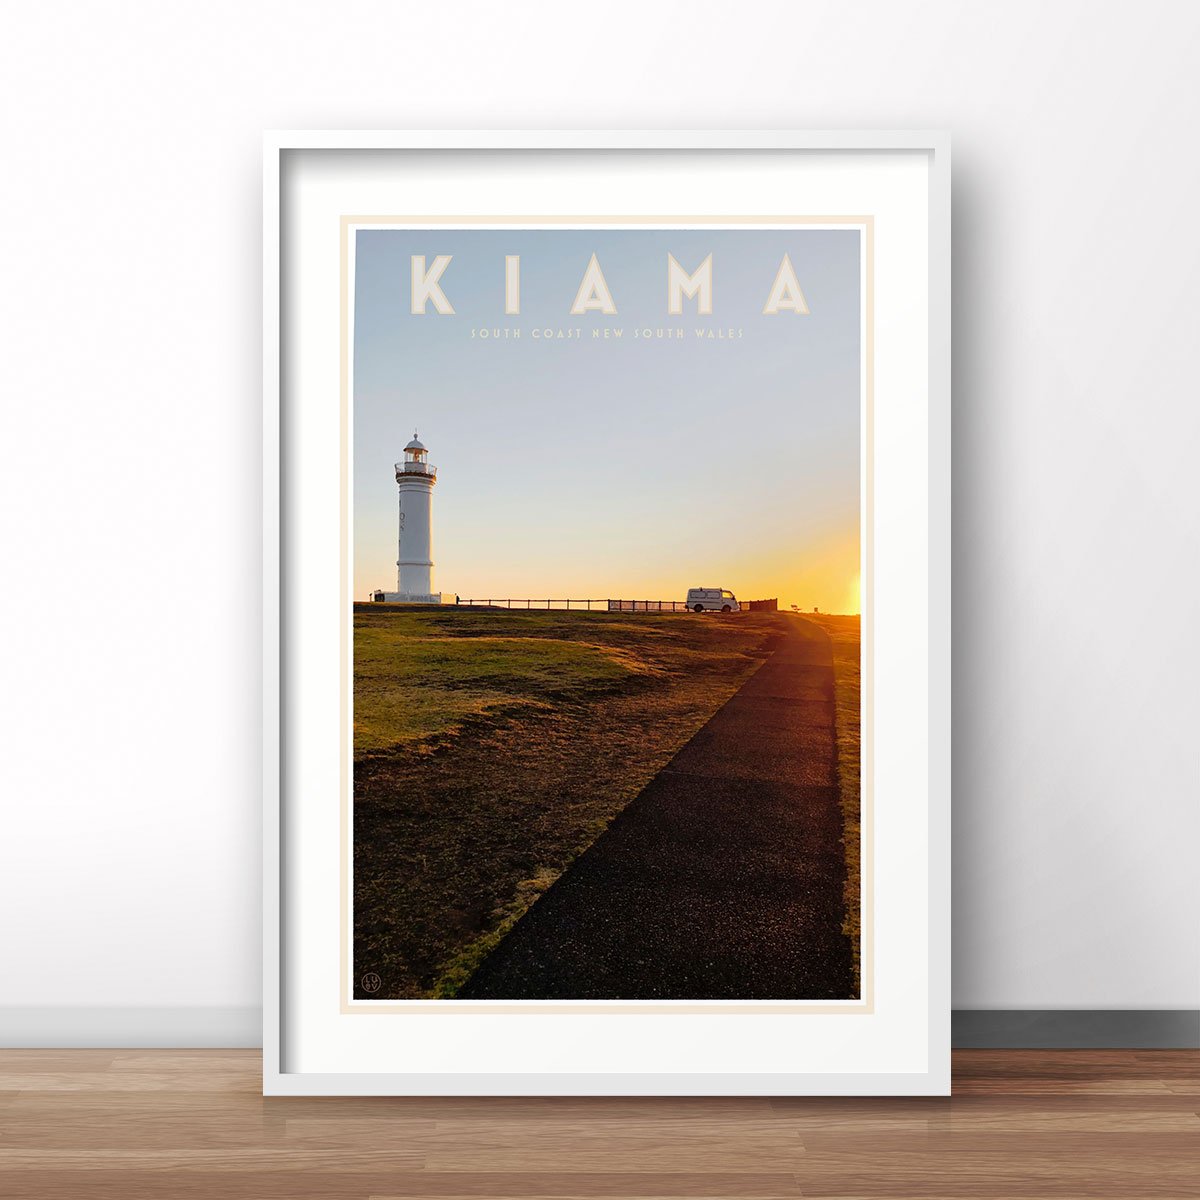 Kiama vintage travel style print in frame - design by Places We Luv